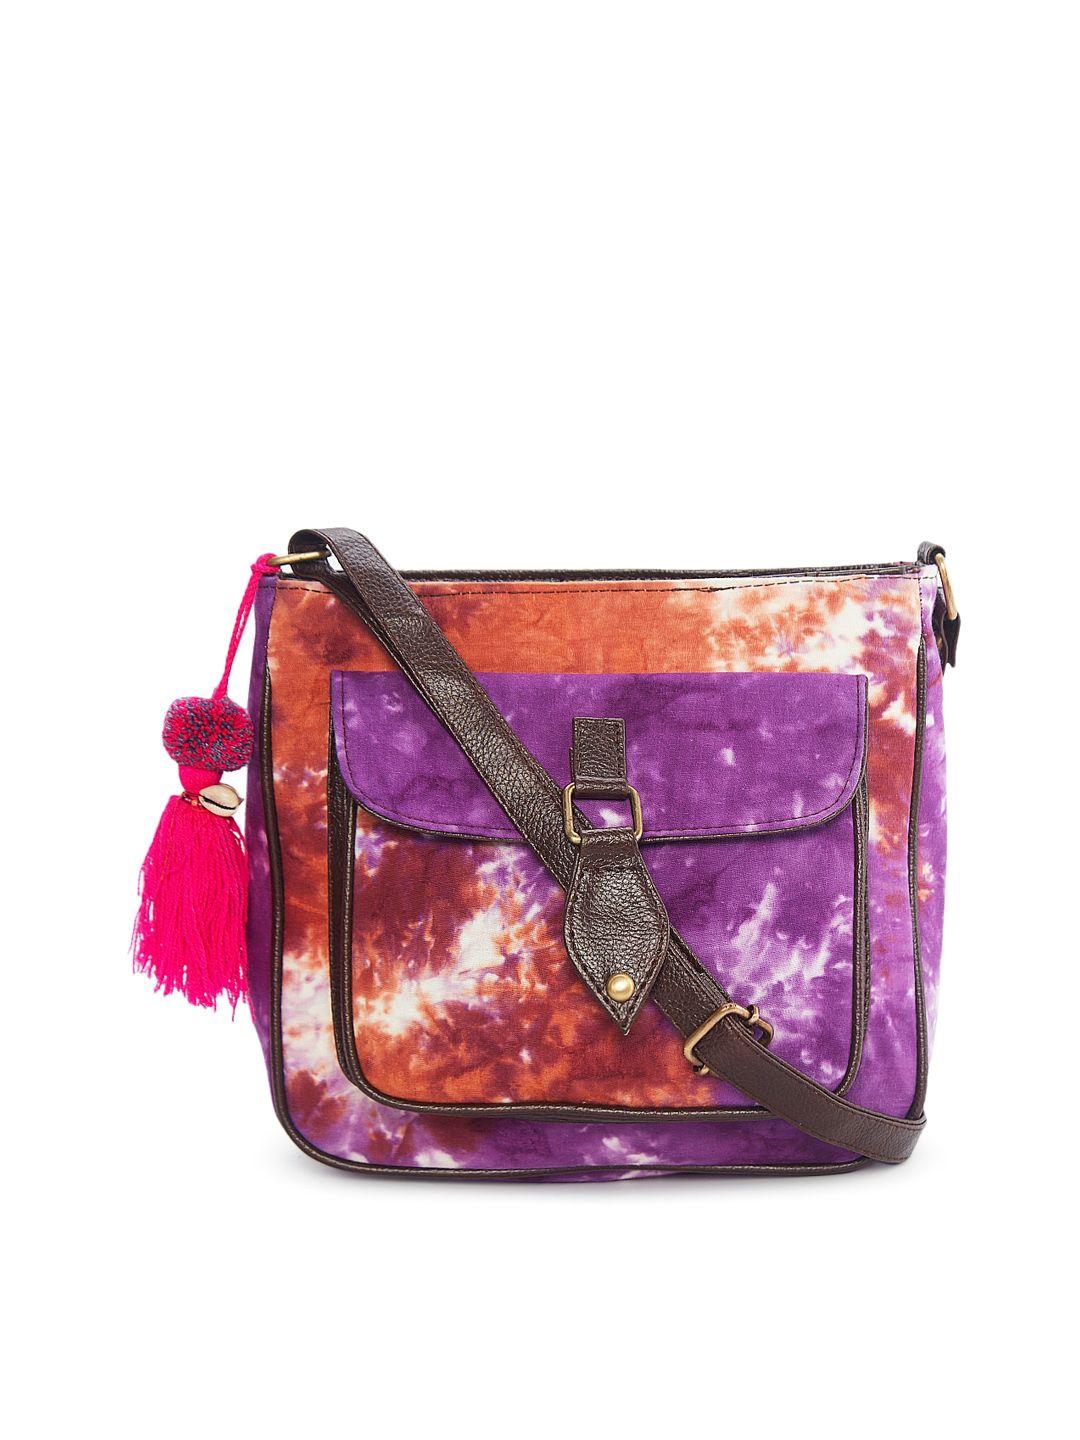 nepri abstract printed structured sling bag with tasselled